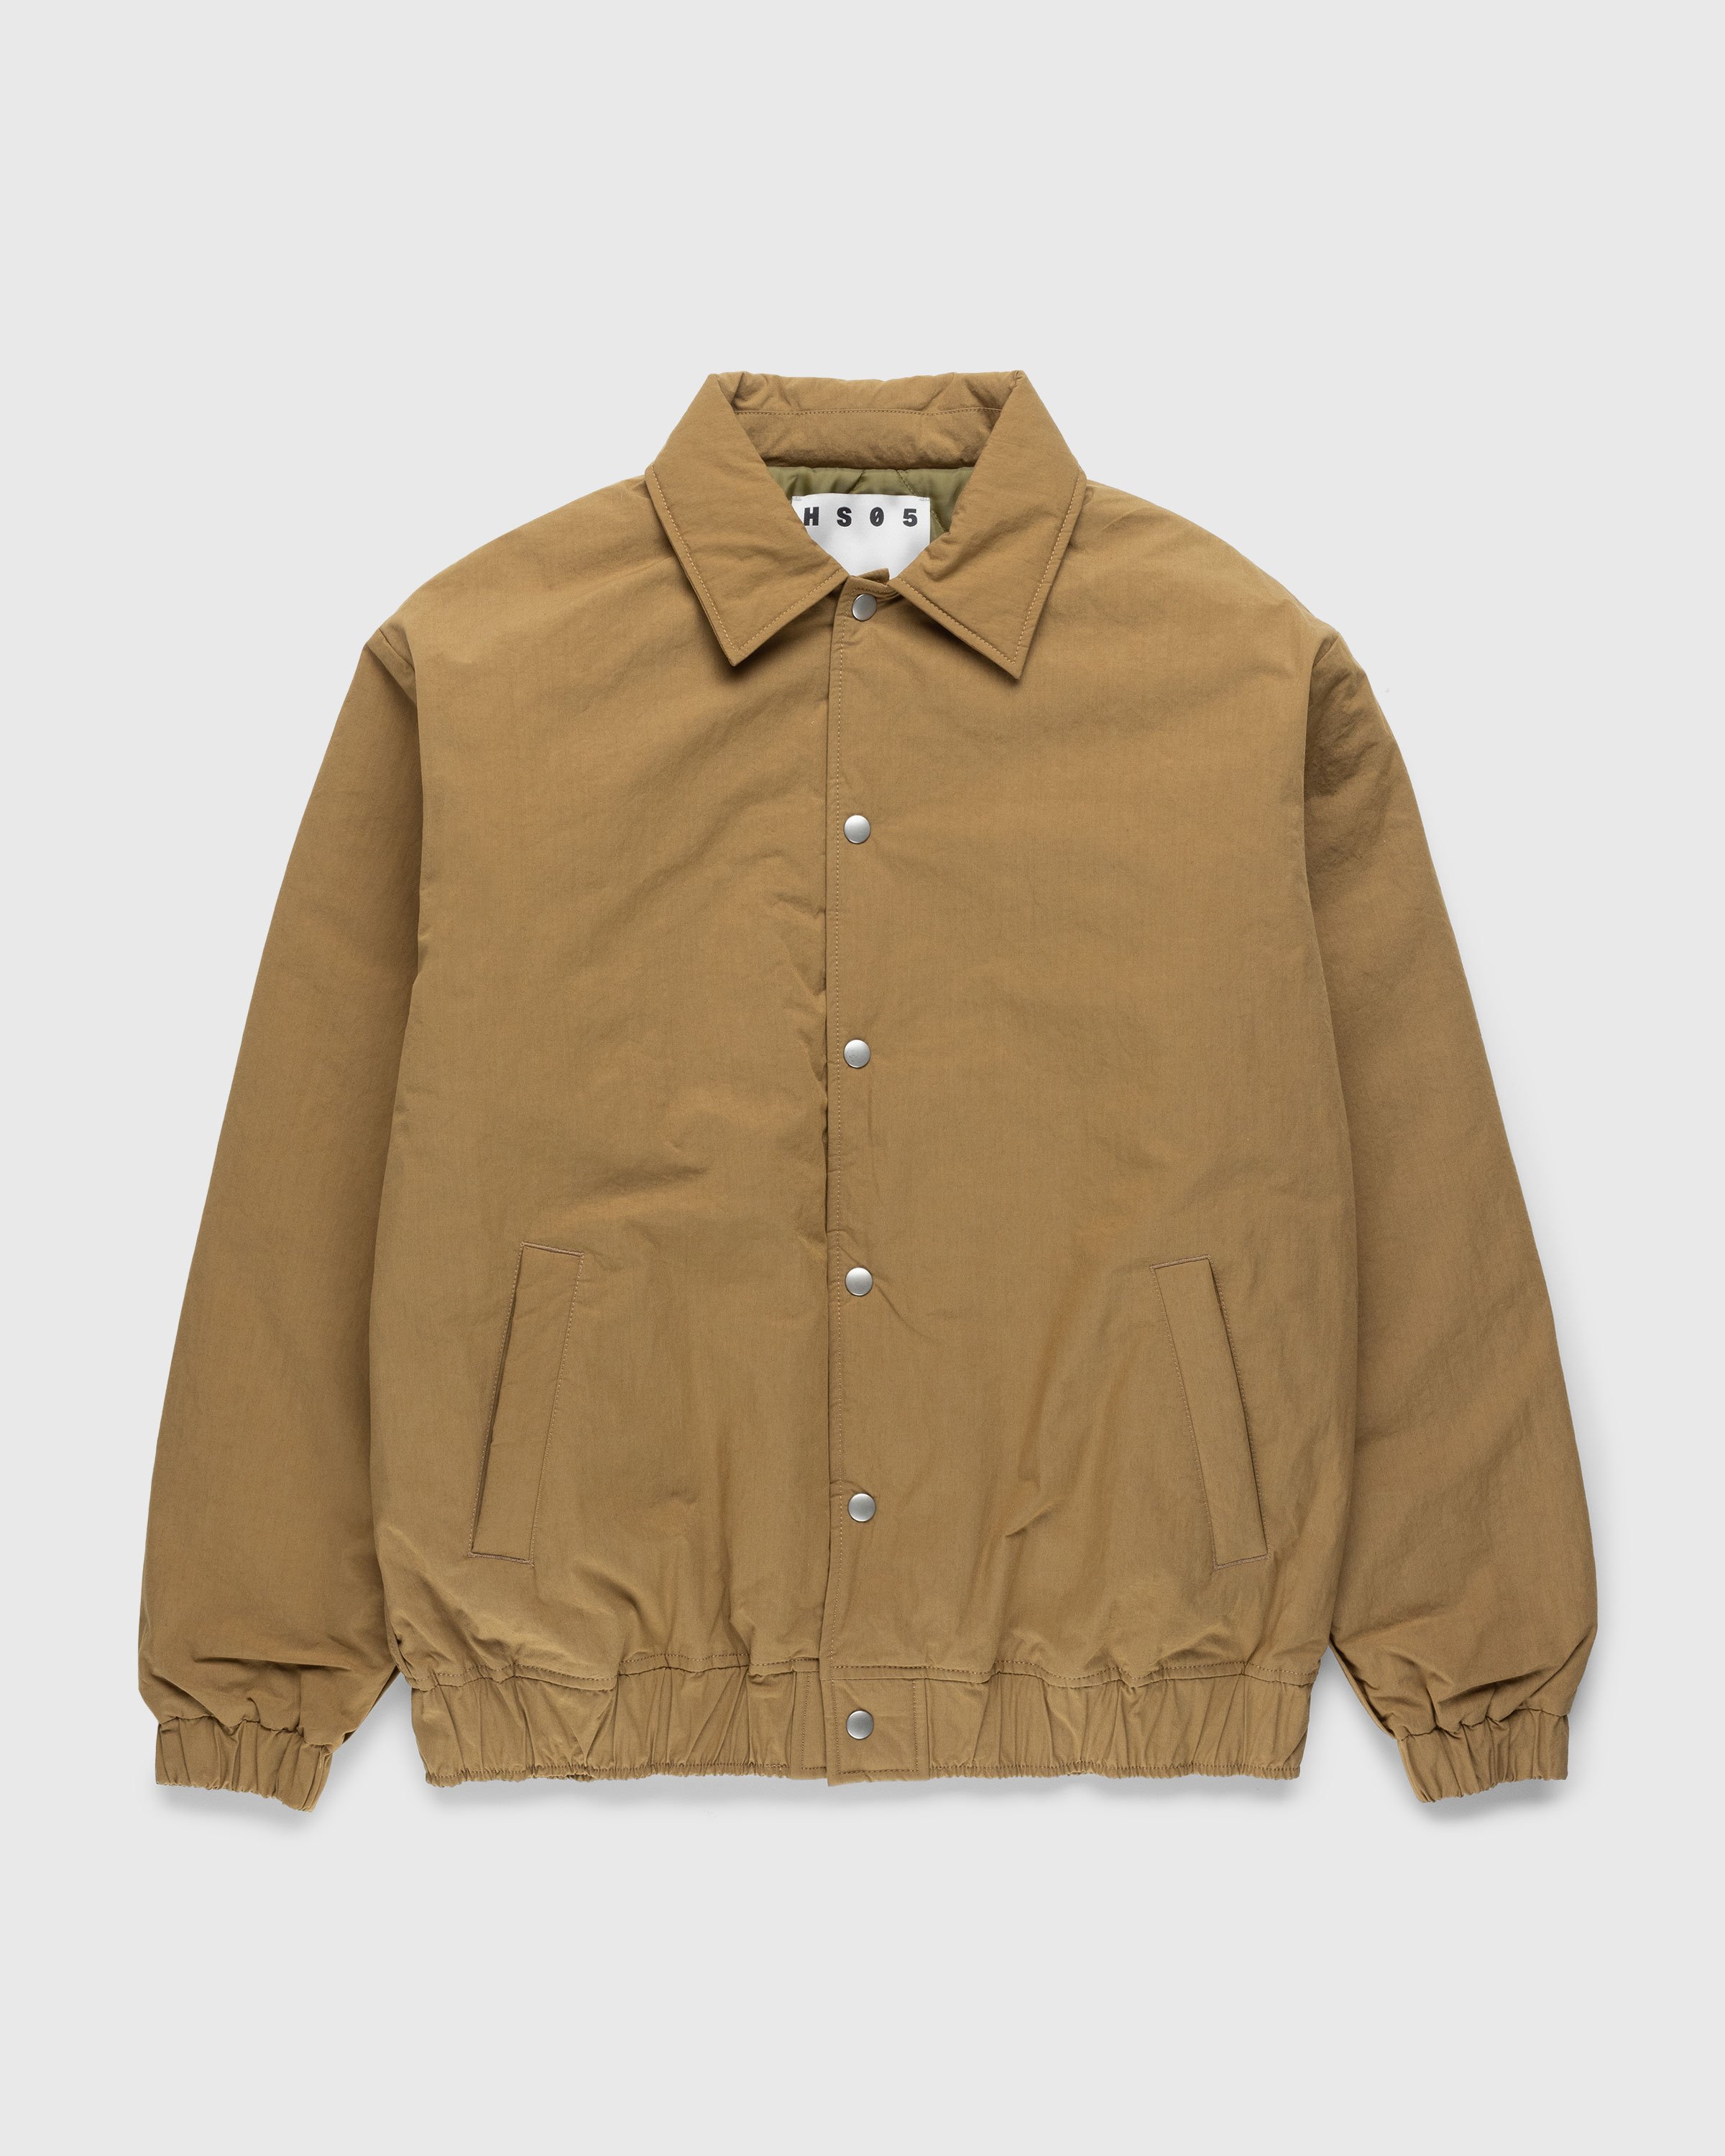 Highsnobiety HS05 - Reverse Piping Insulated Jacket Beige - Clothing - Beige - Image 1